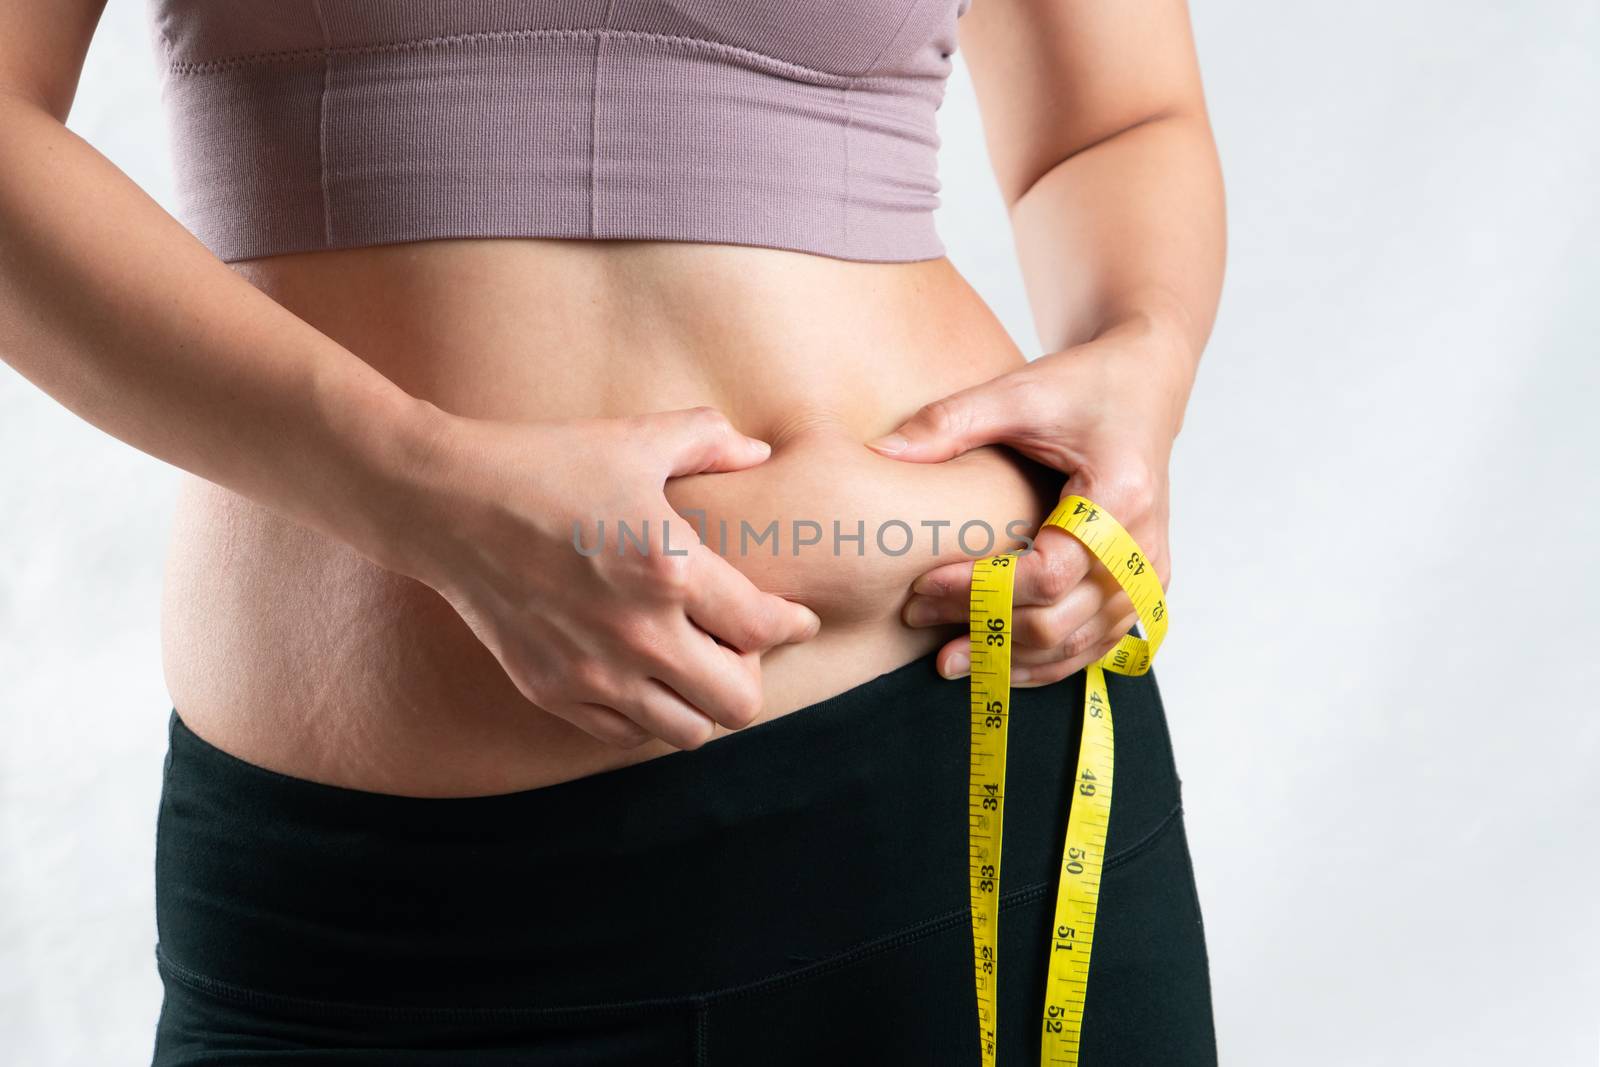 fat woman, fat belly, chubby, obese woman hand holding excessive belly fat with measure tape, woman diet lifestyle concept